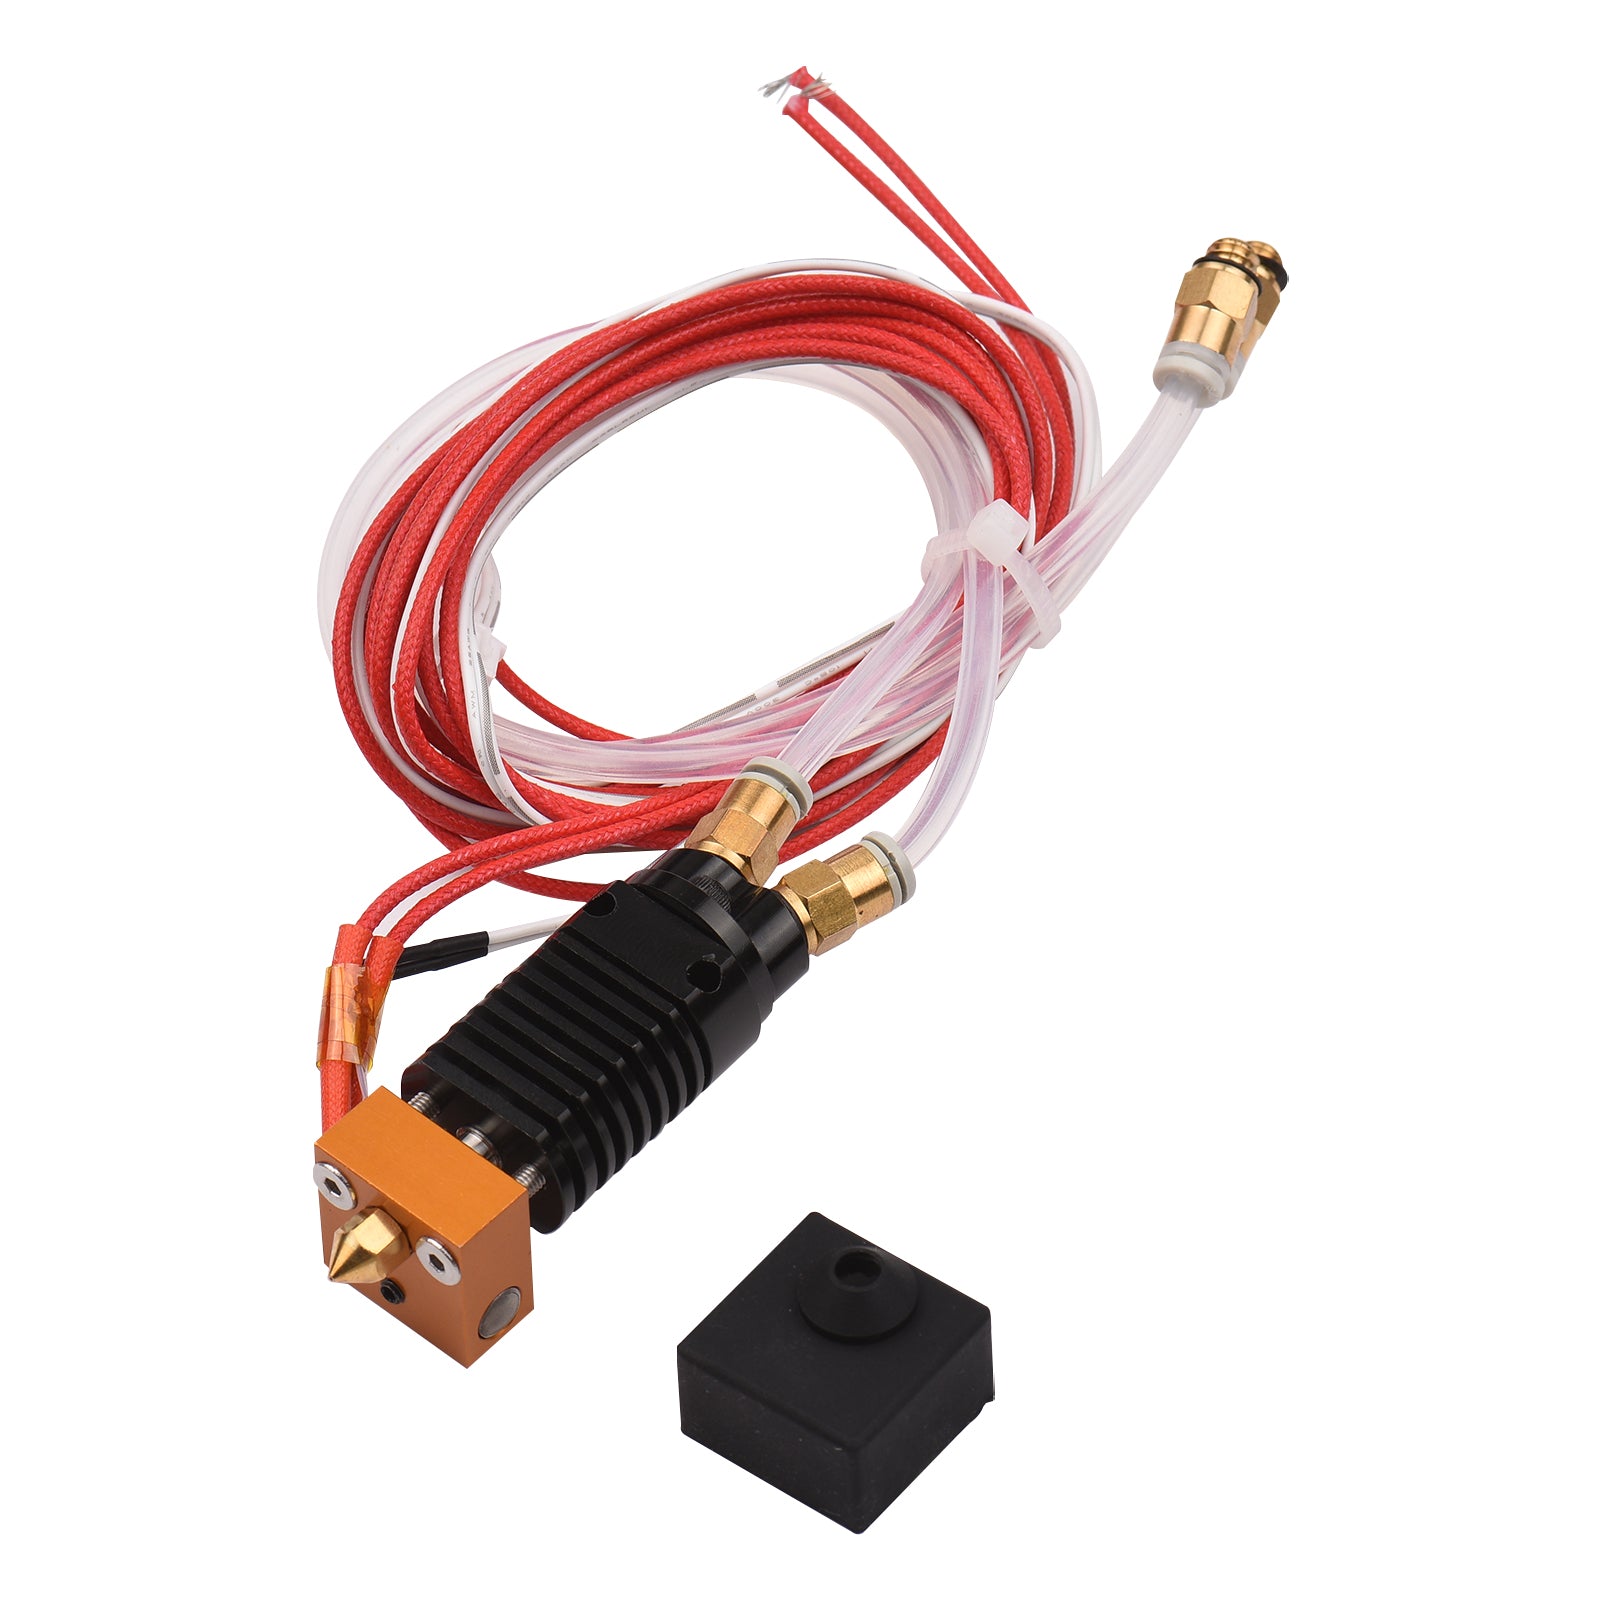 2 in 1 Out Aluminum Alloy hot end extruder Kit with MK8 0.4MM nozzle heating tube thermistor sensor 24V for CR10S PRO Ender-3 for 3D Printer